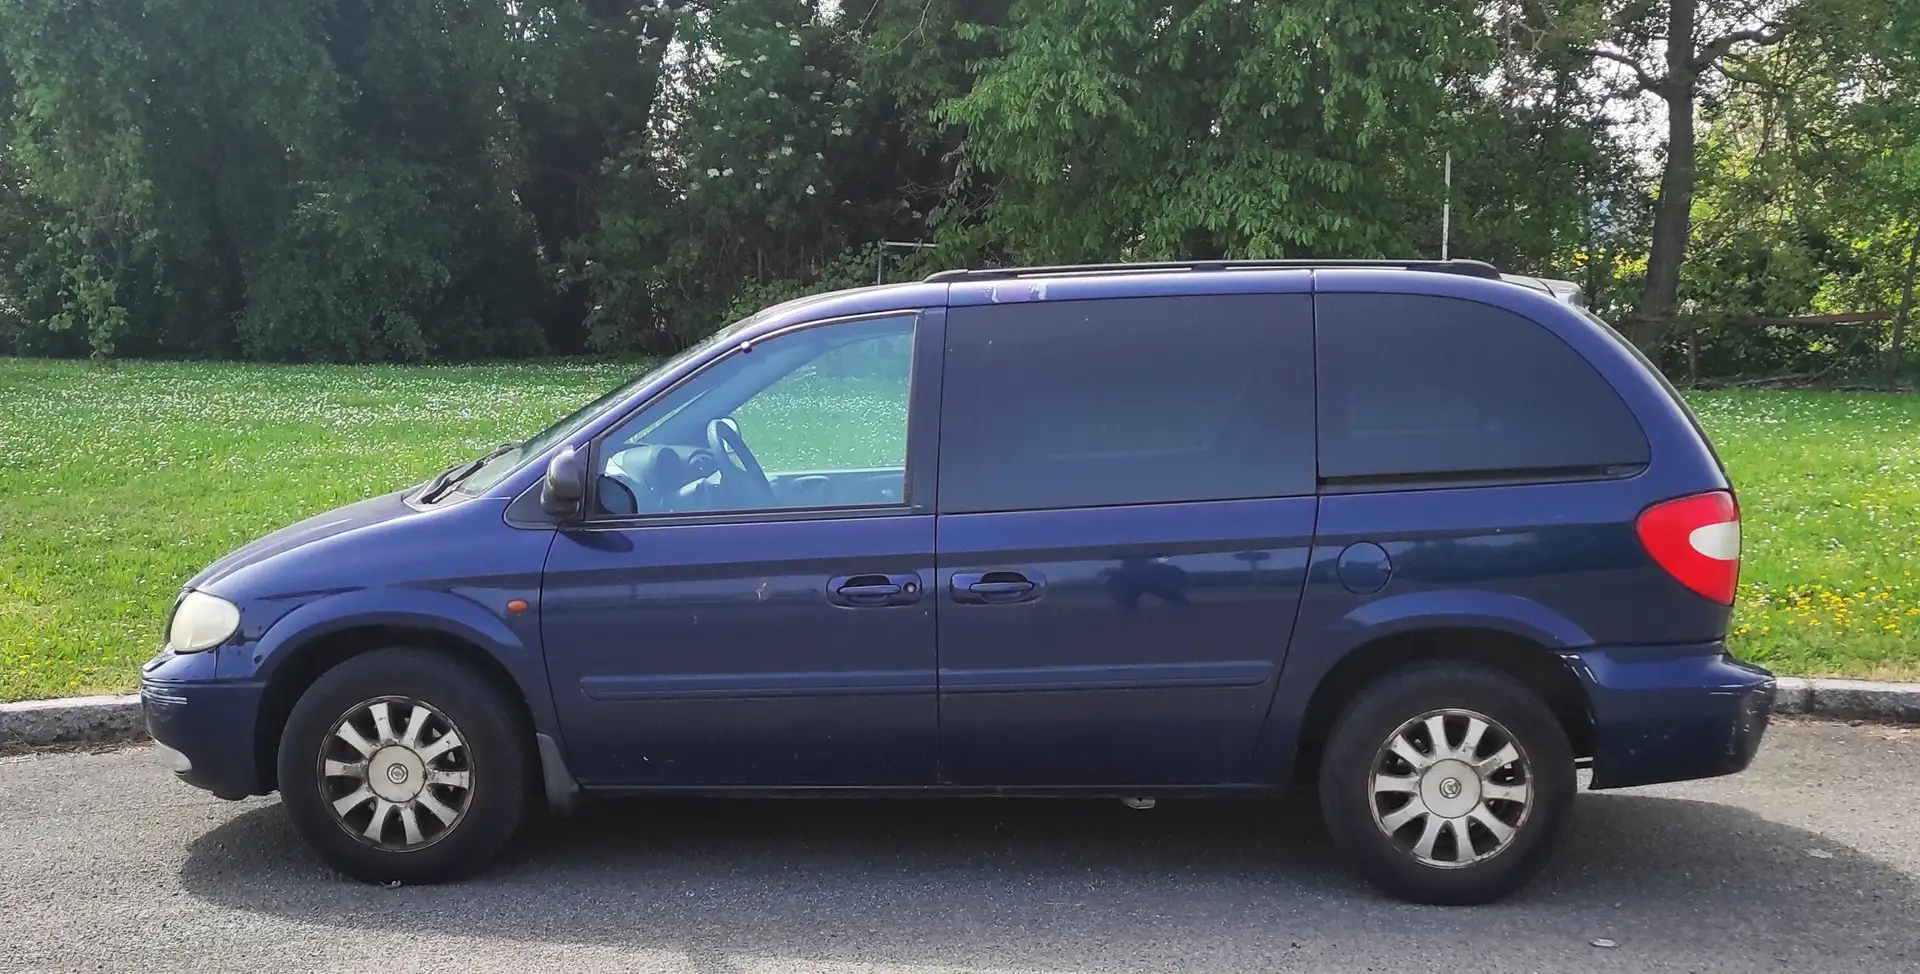 Chrysler Voyager Voyager III 2001 2.5 crd LE Blauw - 2